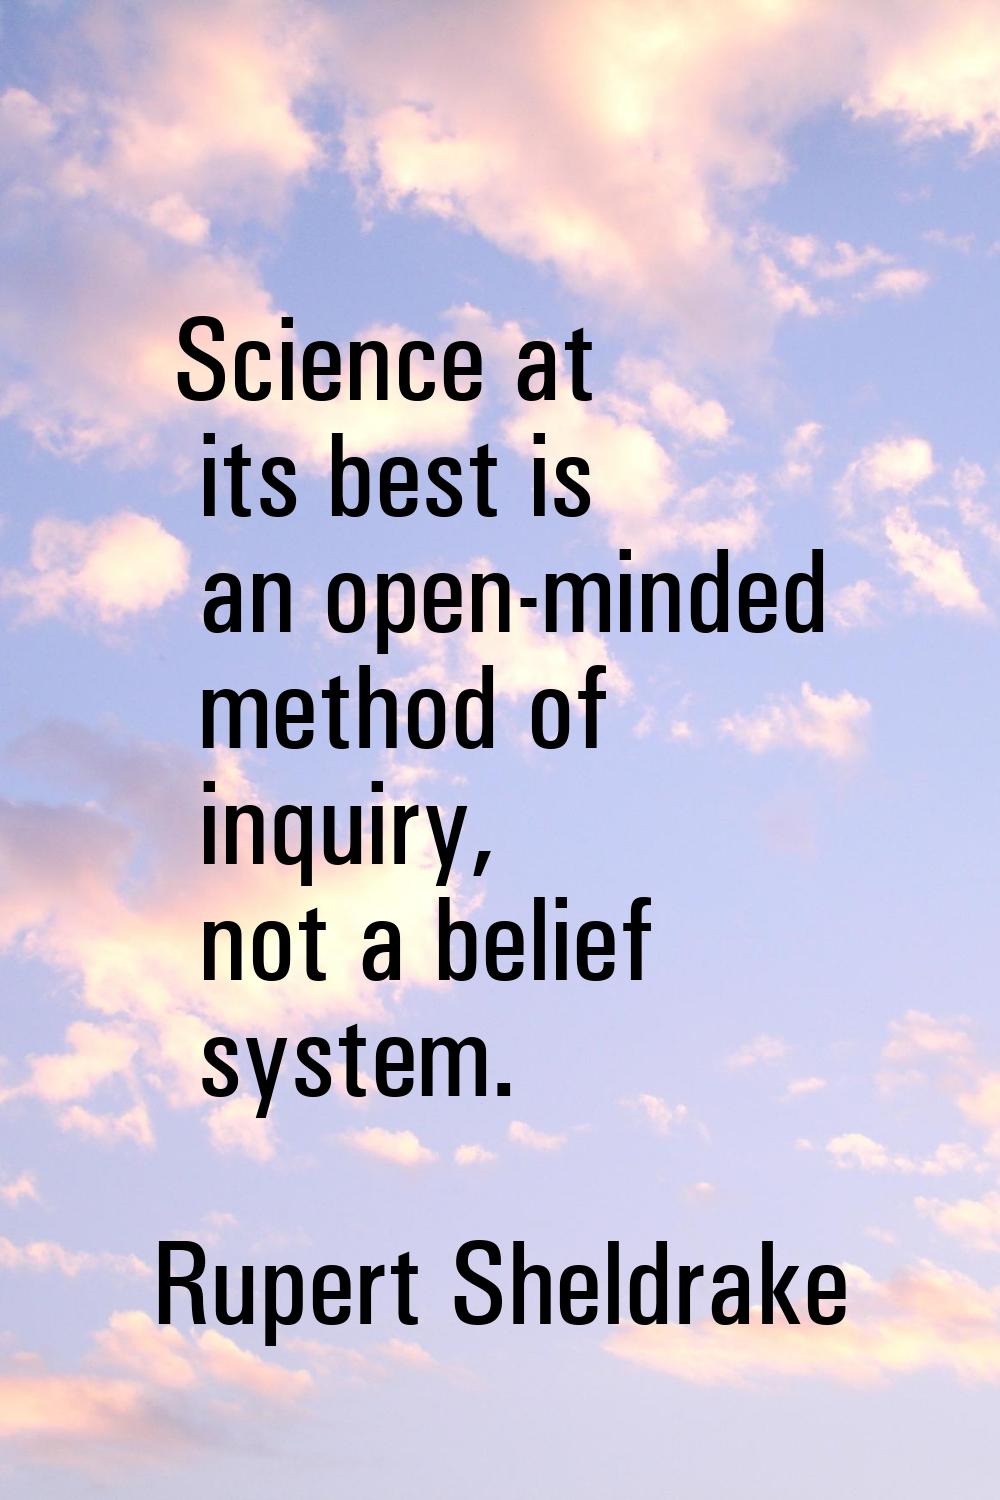 Science at its best is an open-minded method of inquiry, not a belief system.